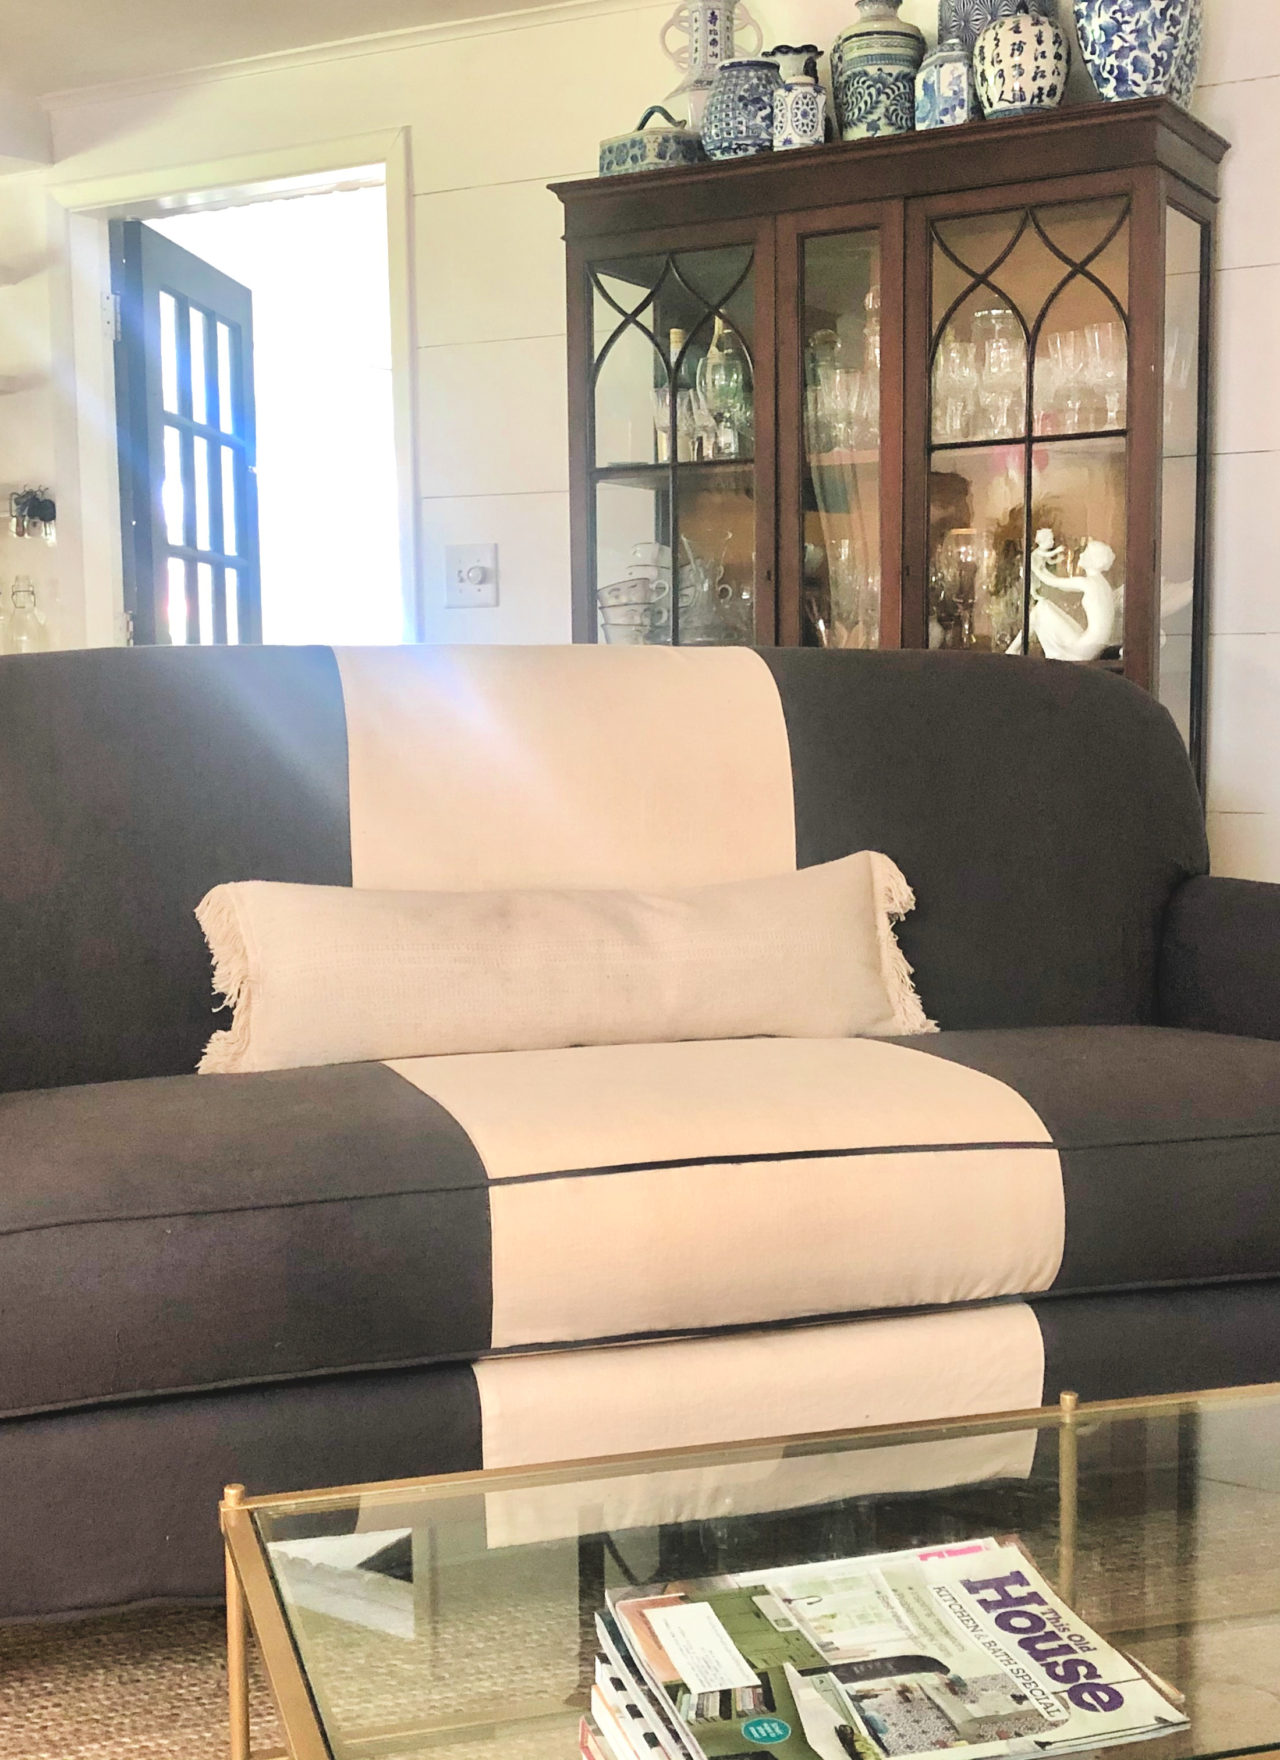 How to Cut and Pin Sofa Slipcover